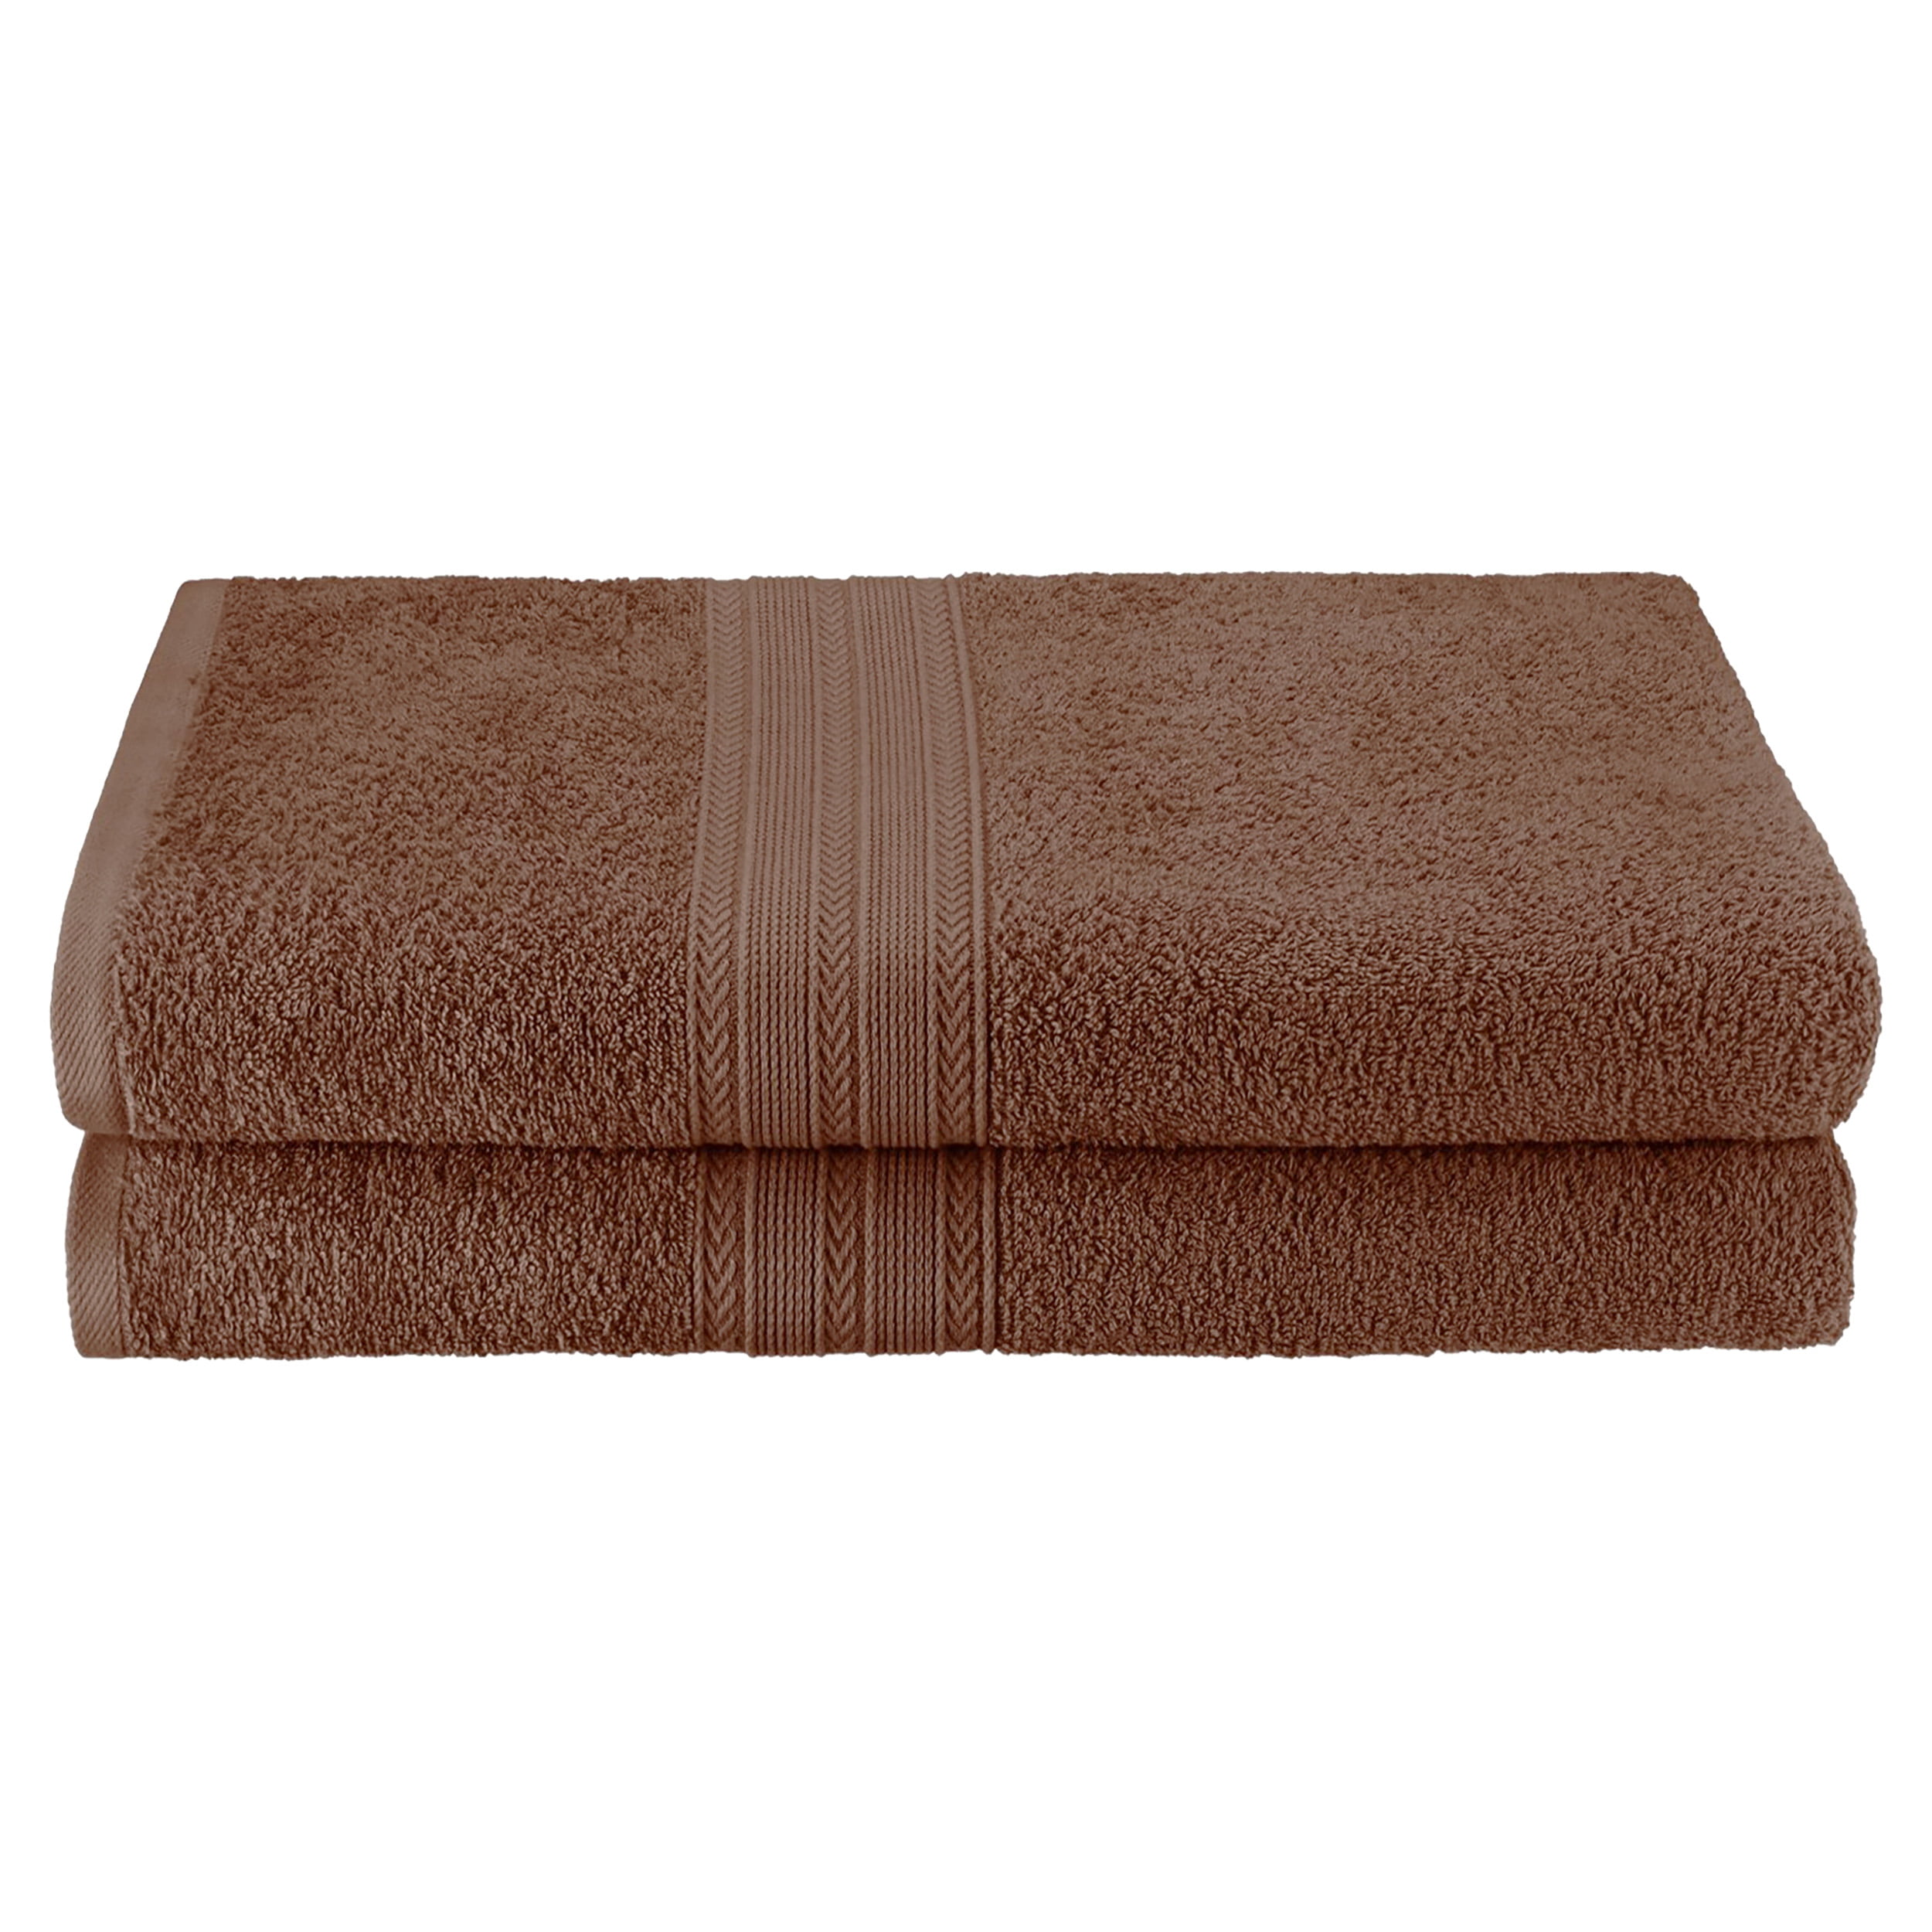 Set of 2 Brown Ring Spun Combed Cotton Soft and Absorbent Bath Sheet Towels 